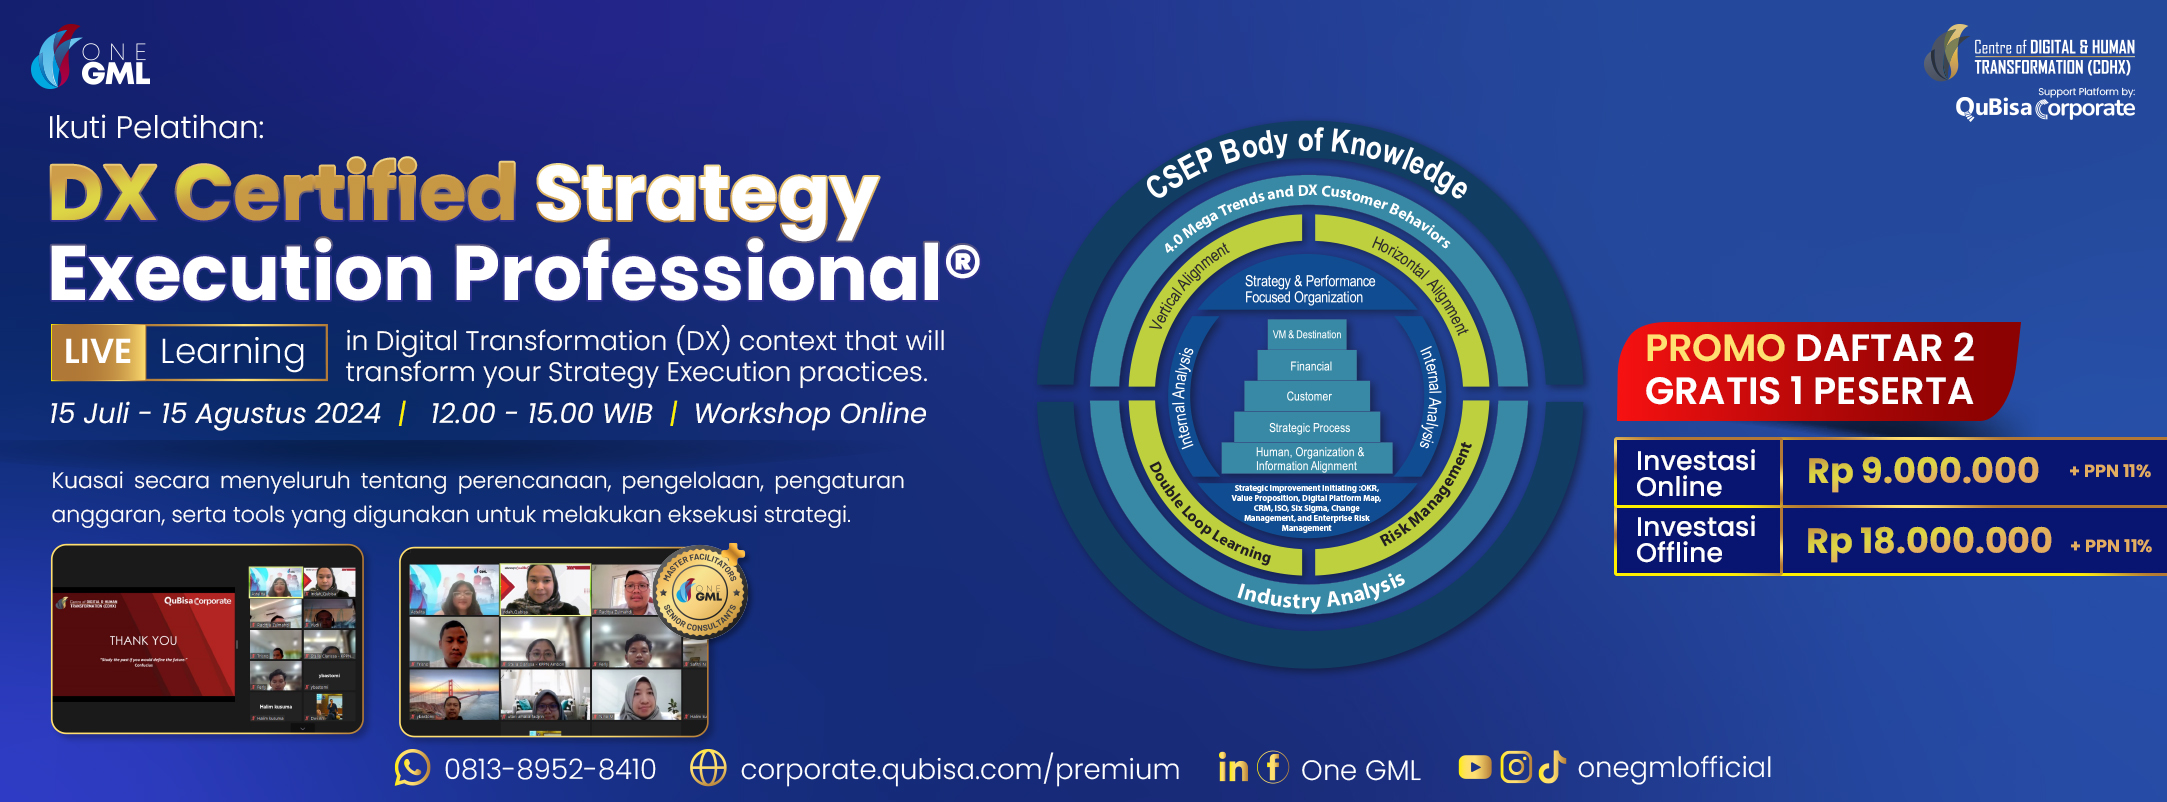 02. DX Certified Strategy Execution Professional.jpg